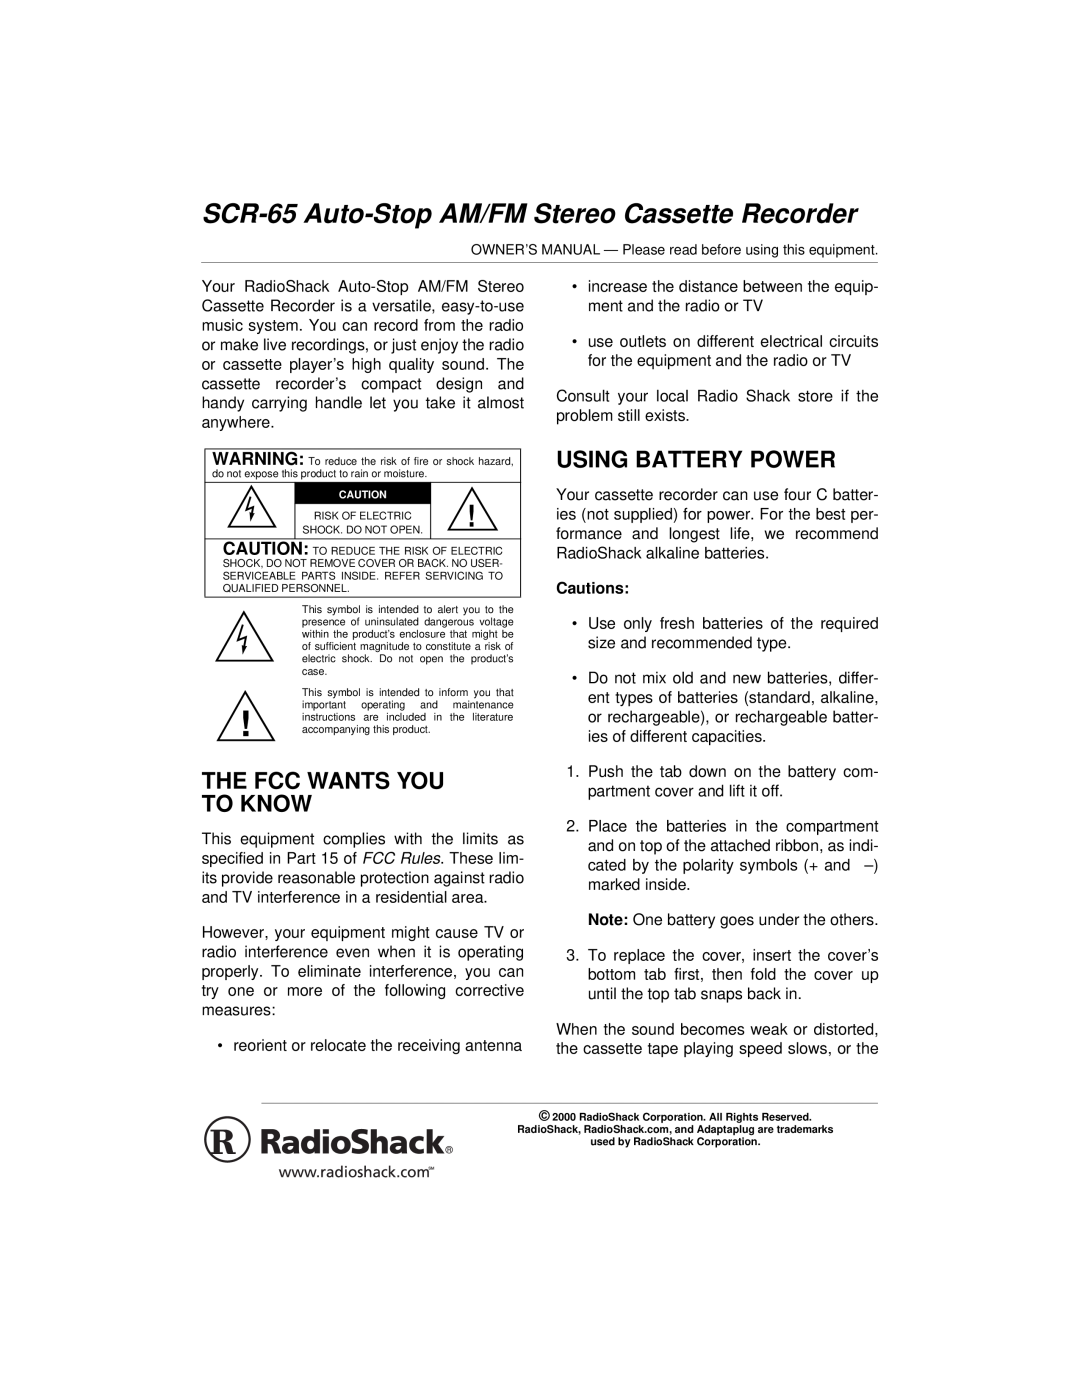 Radio Shack SCR-65 specifications The Fcc Wants You To Know, Using Battery Power, Cautions 